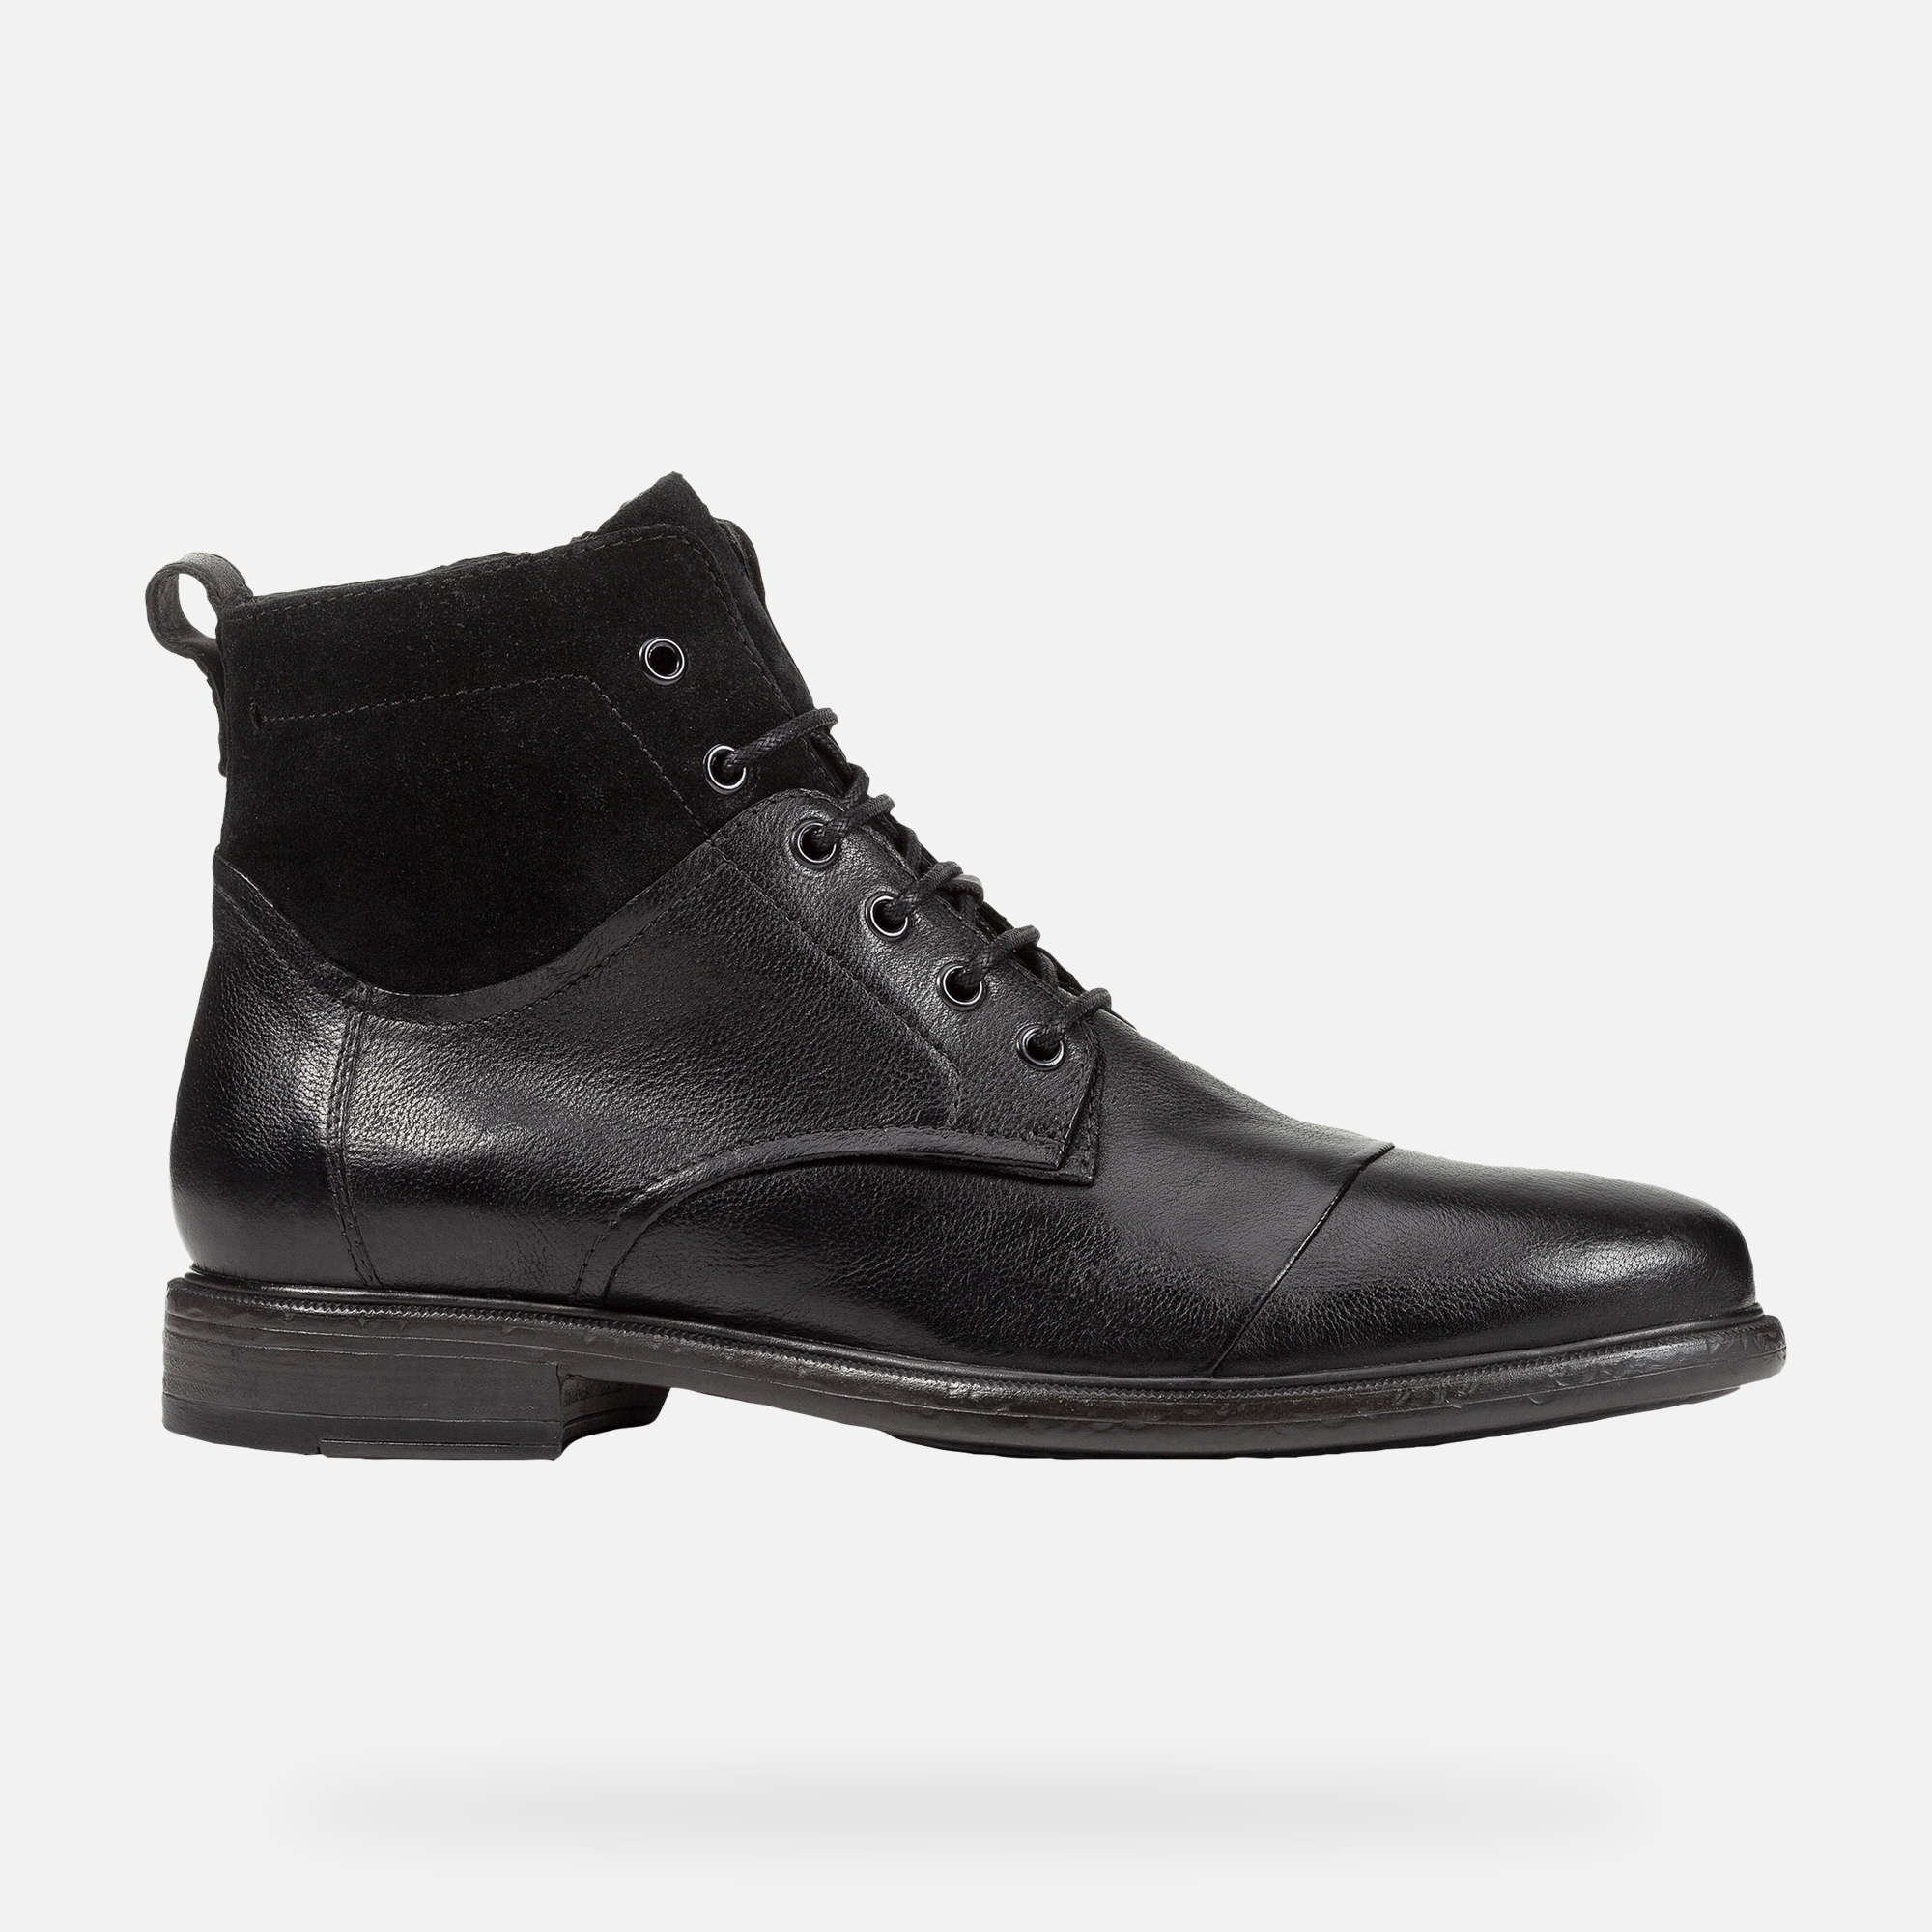 Geox TERENCE Man: Black Ankle Boots | Geox Fall Winter